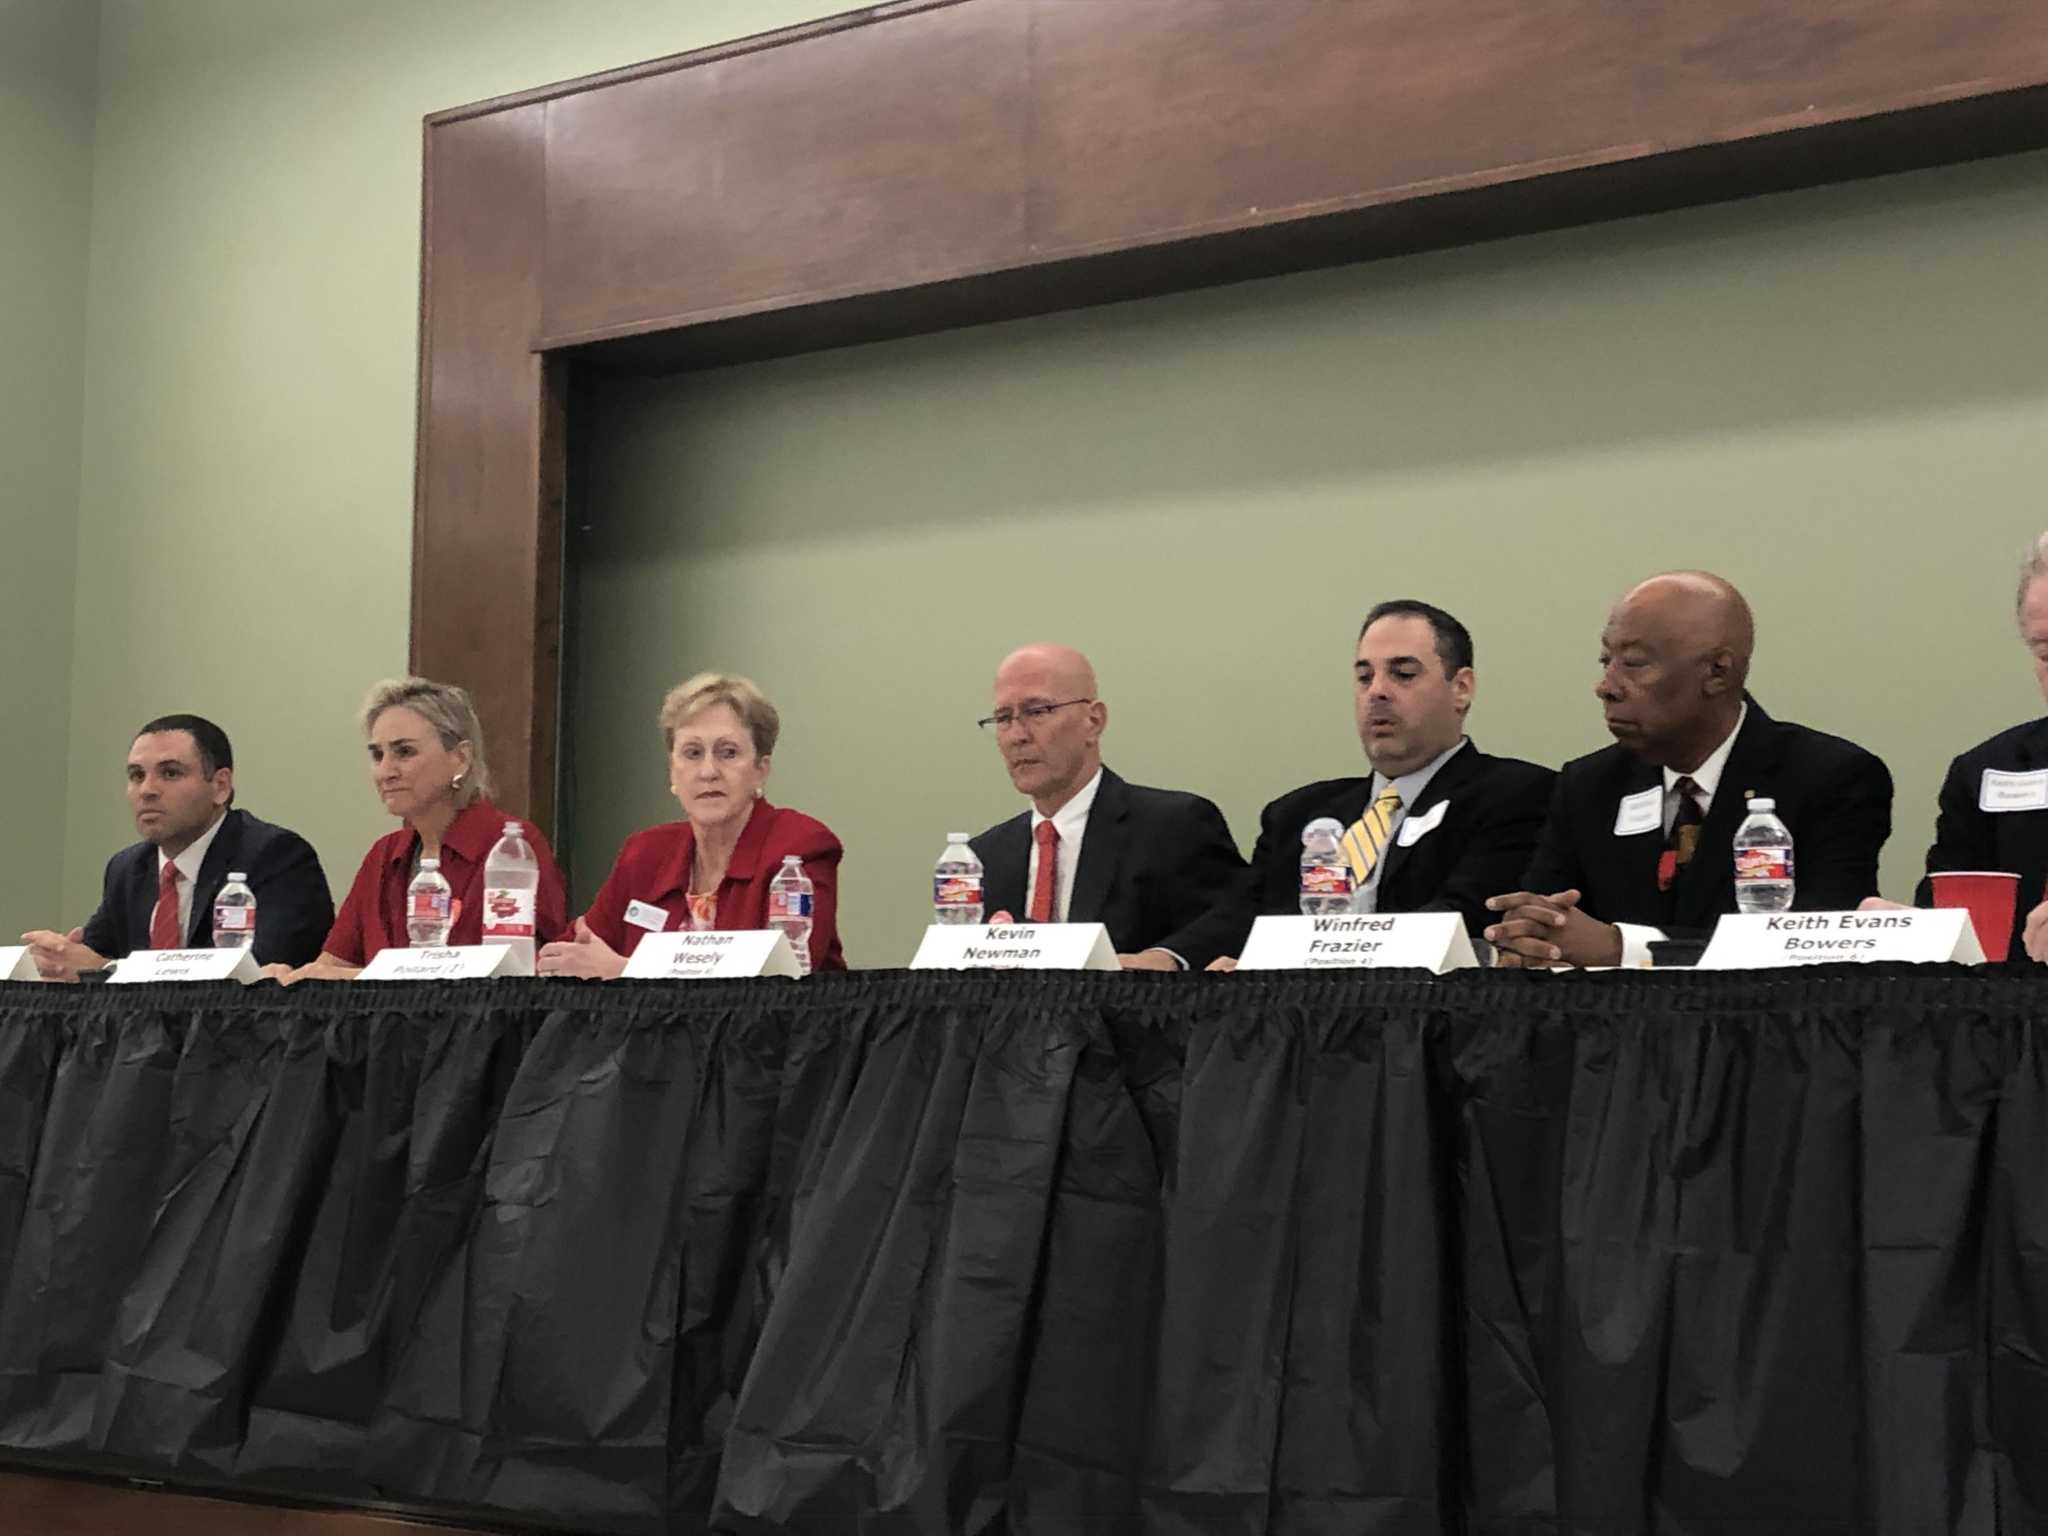 Bellaire City Council candidates face off in forum